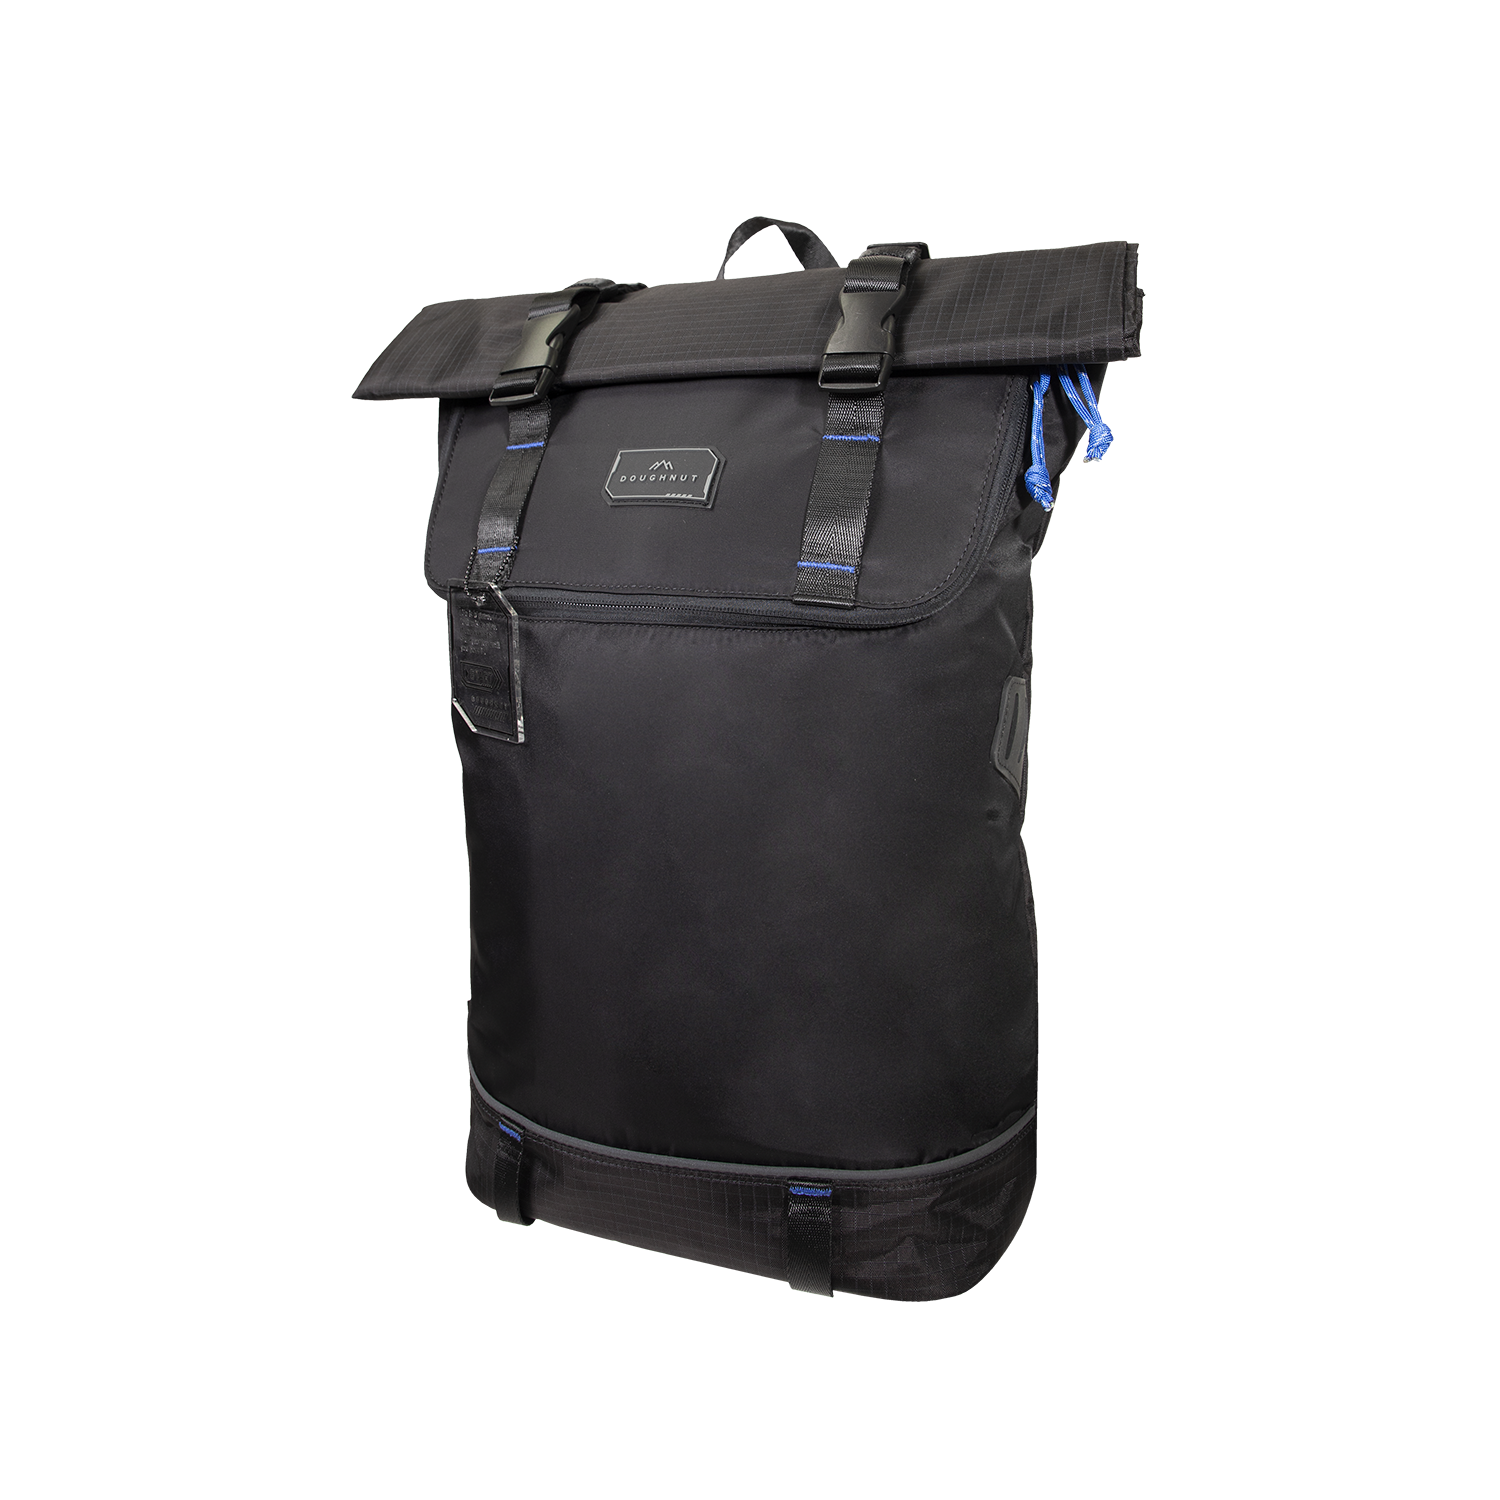 Christopher Gamescape Series Backpack